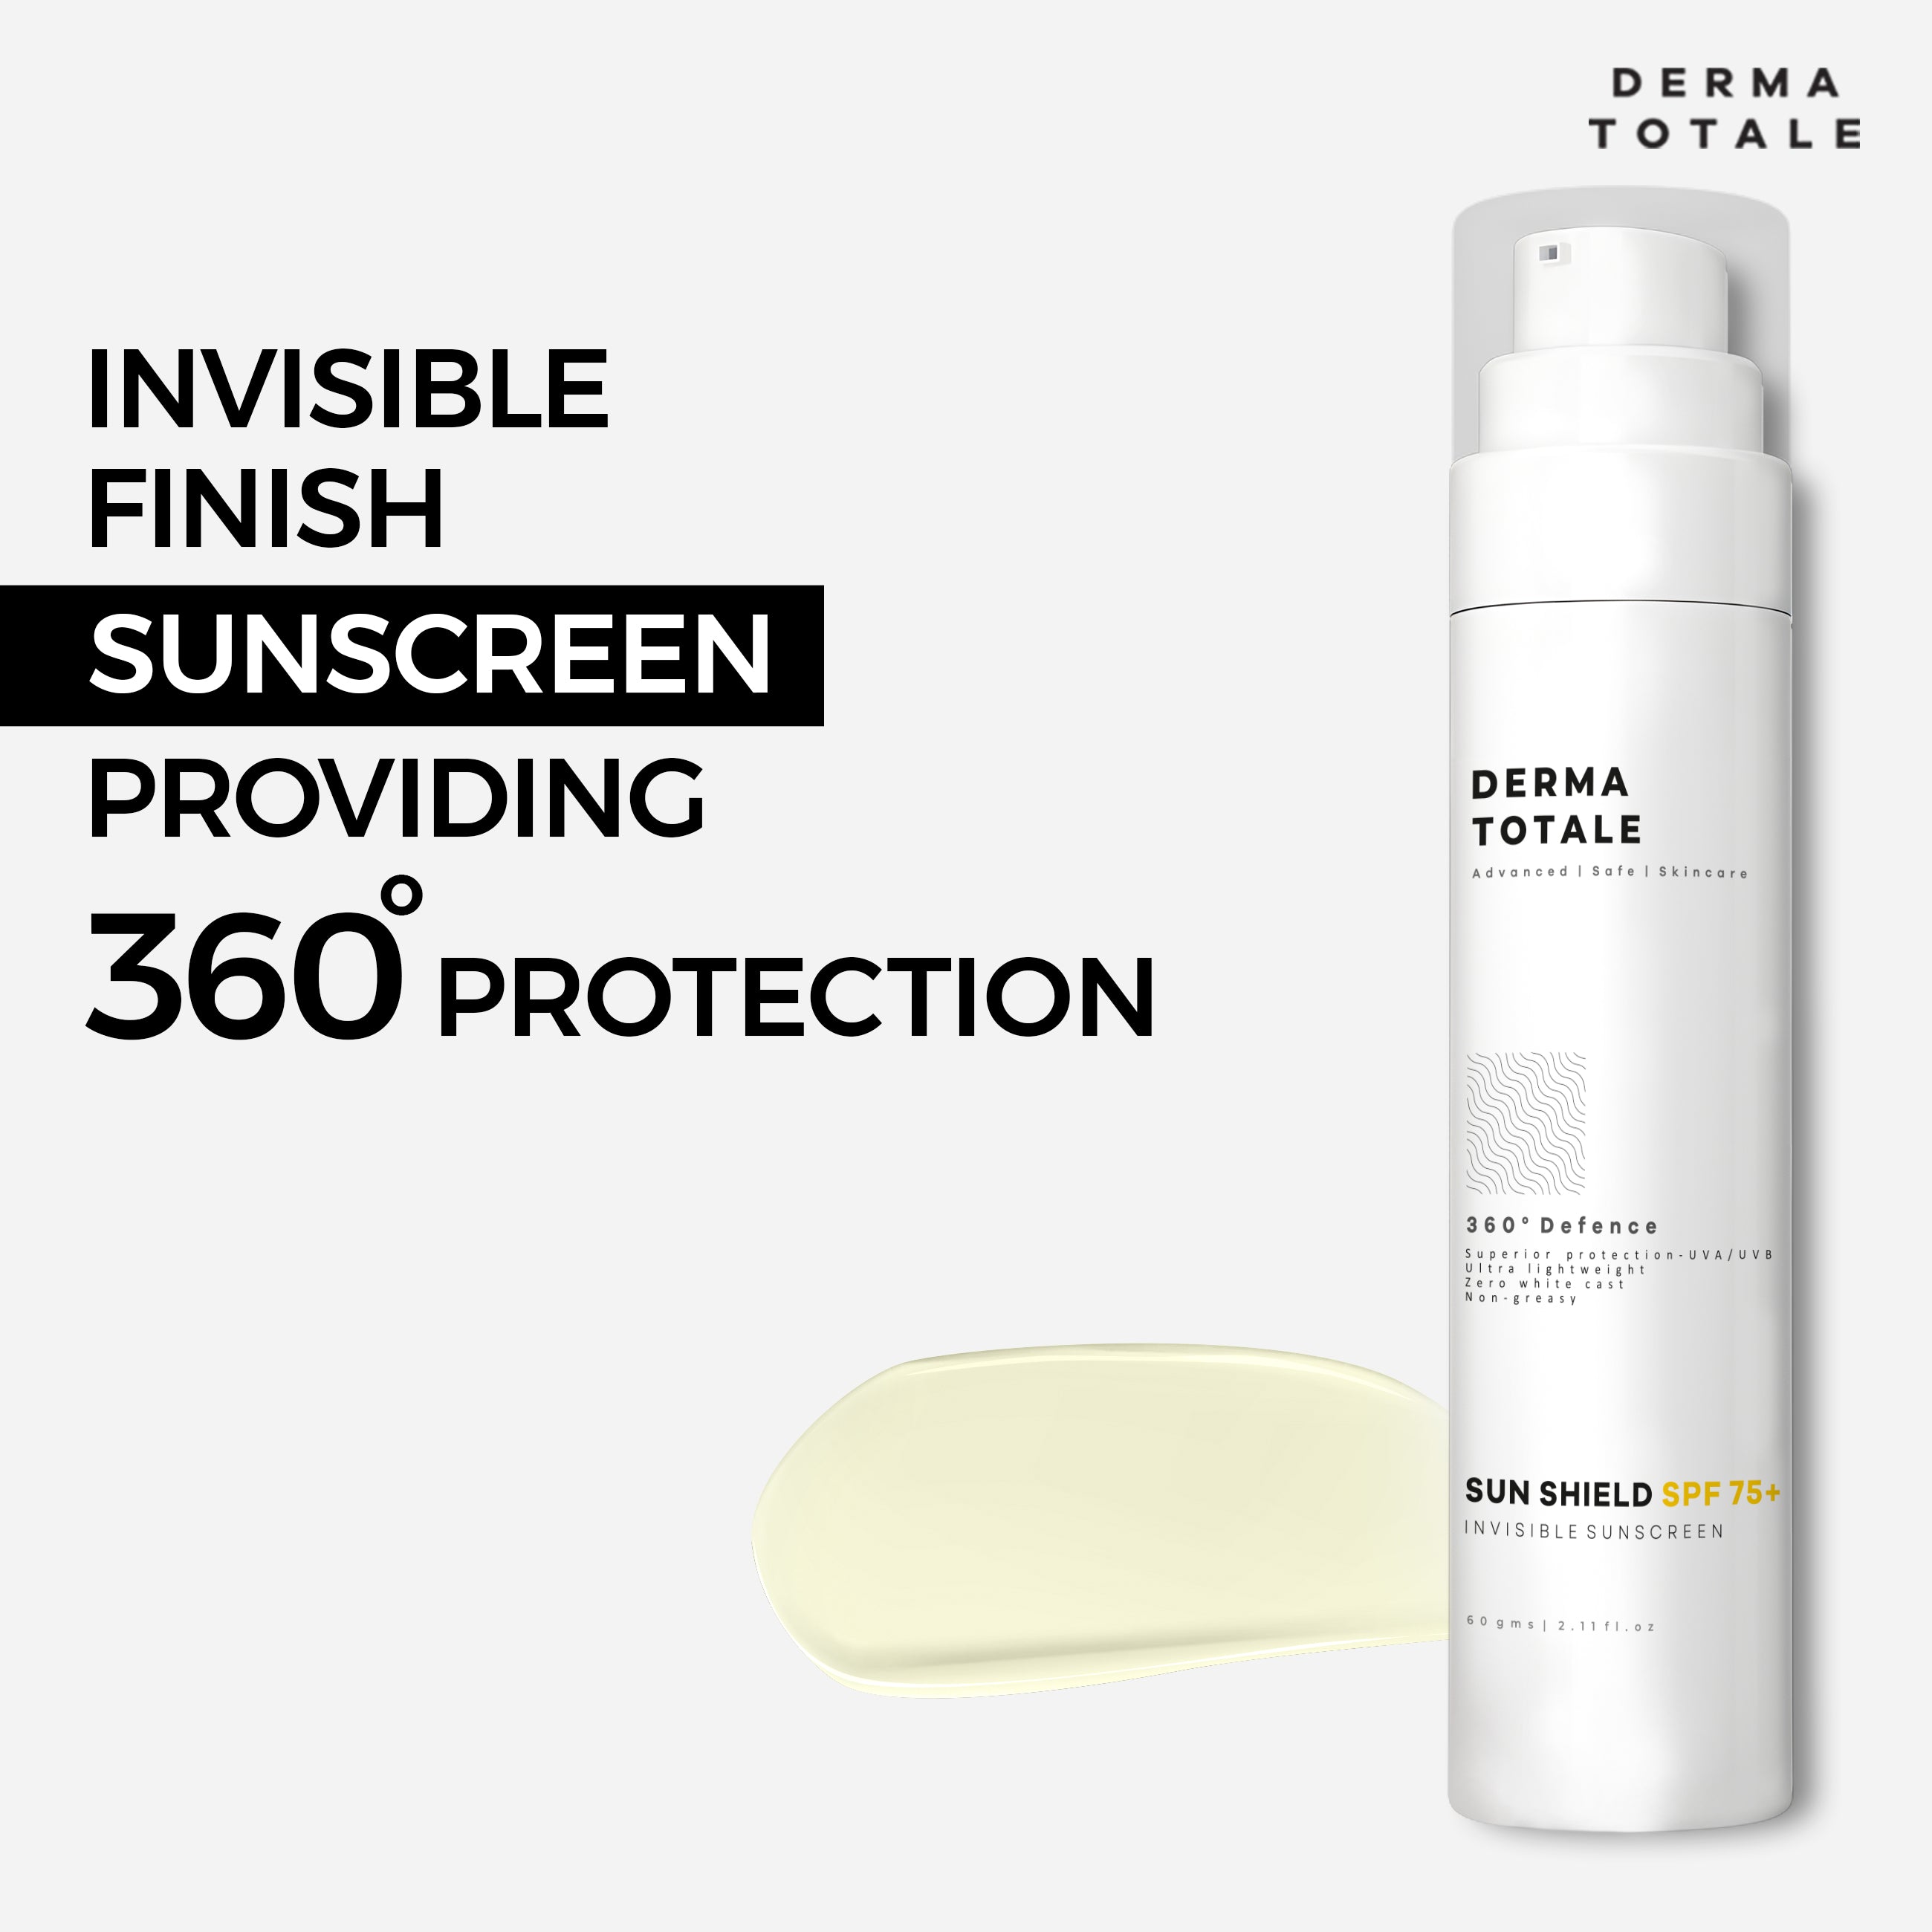 Experience superior sun protection with our SPF 75+ PA+++ Sunscreen.